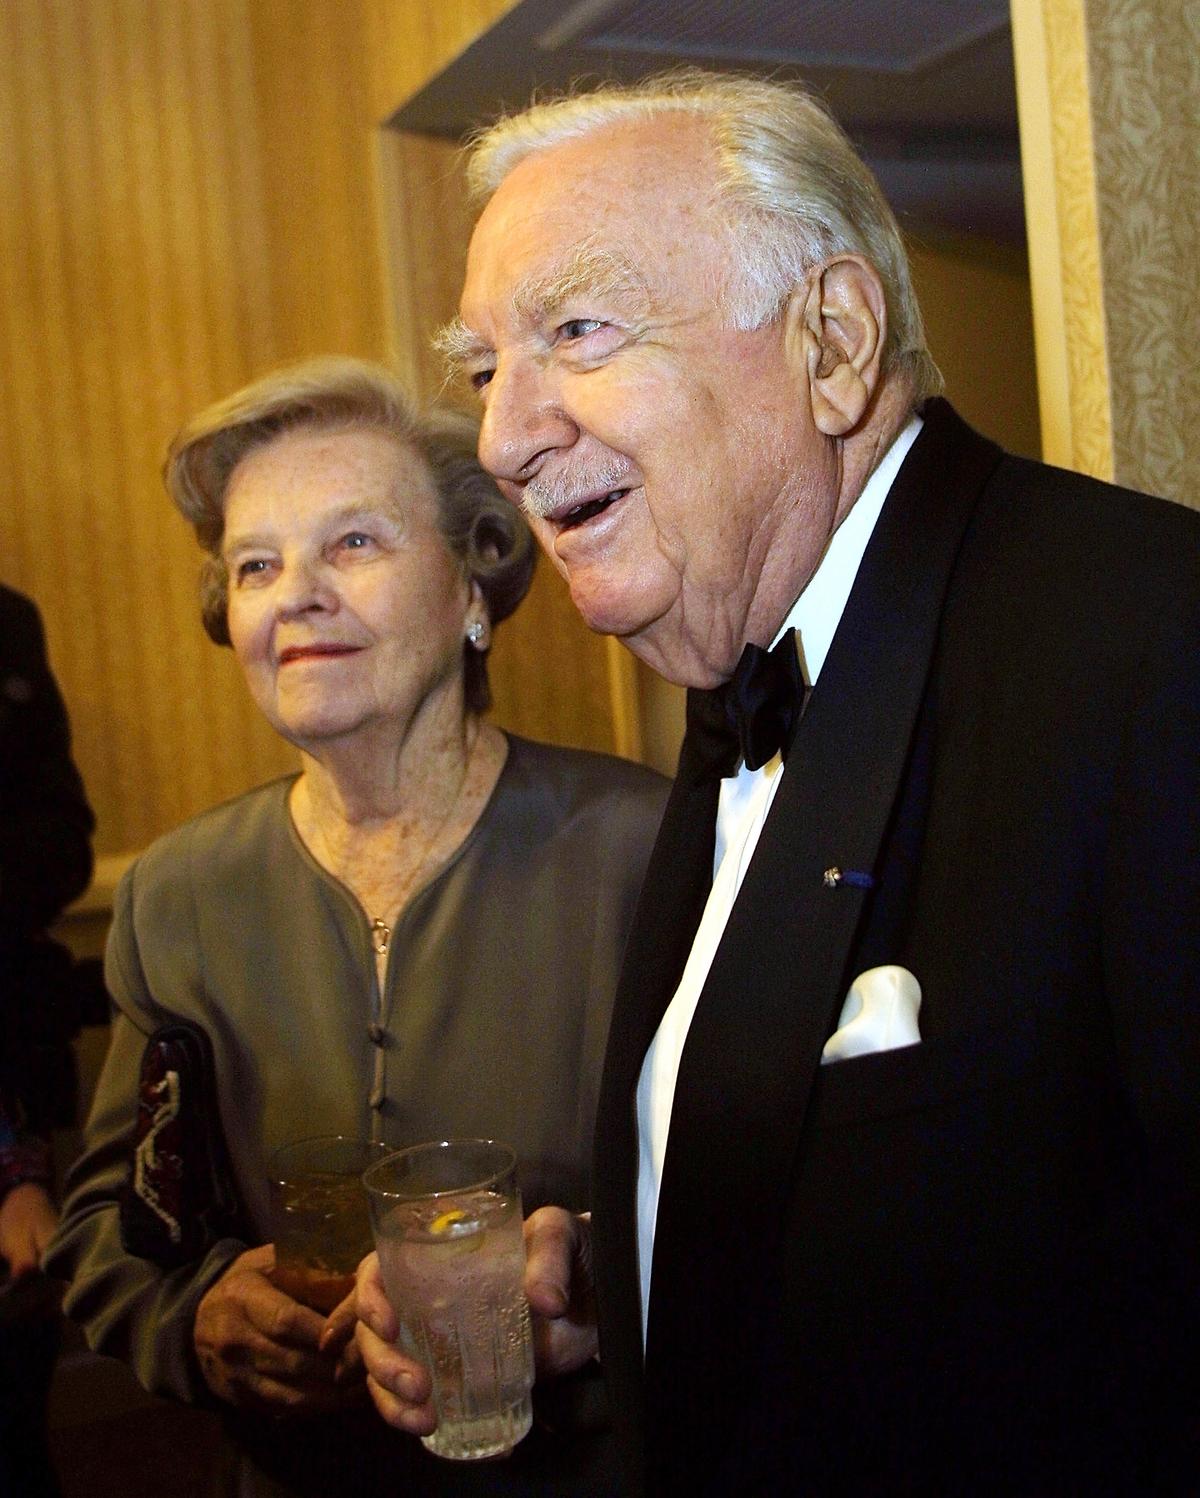 Betsy and Walter Cronkite arrive at the annual White House Correspondents Dinner in Washington on May 4, 2002. (Manny Ceneta/Getty Images)